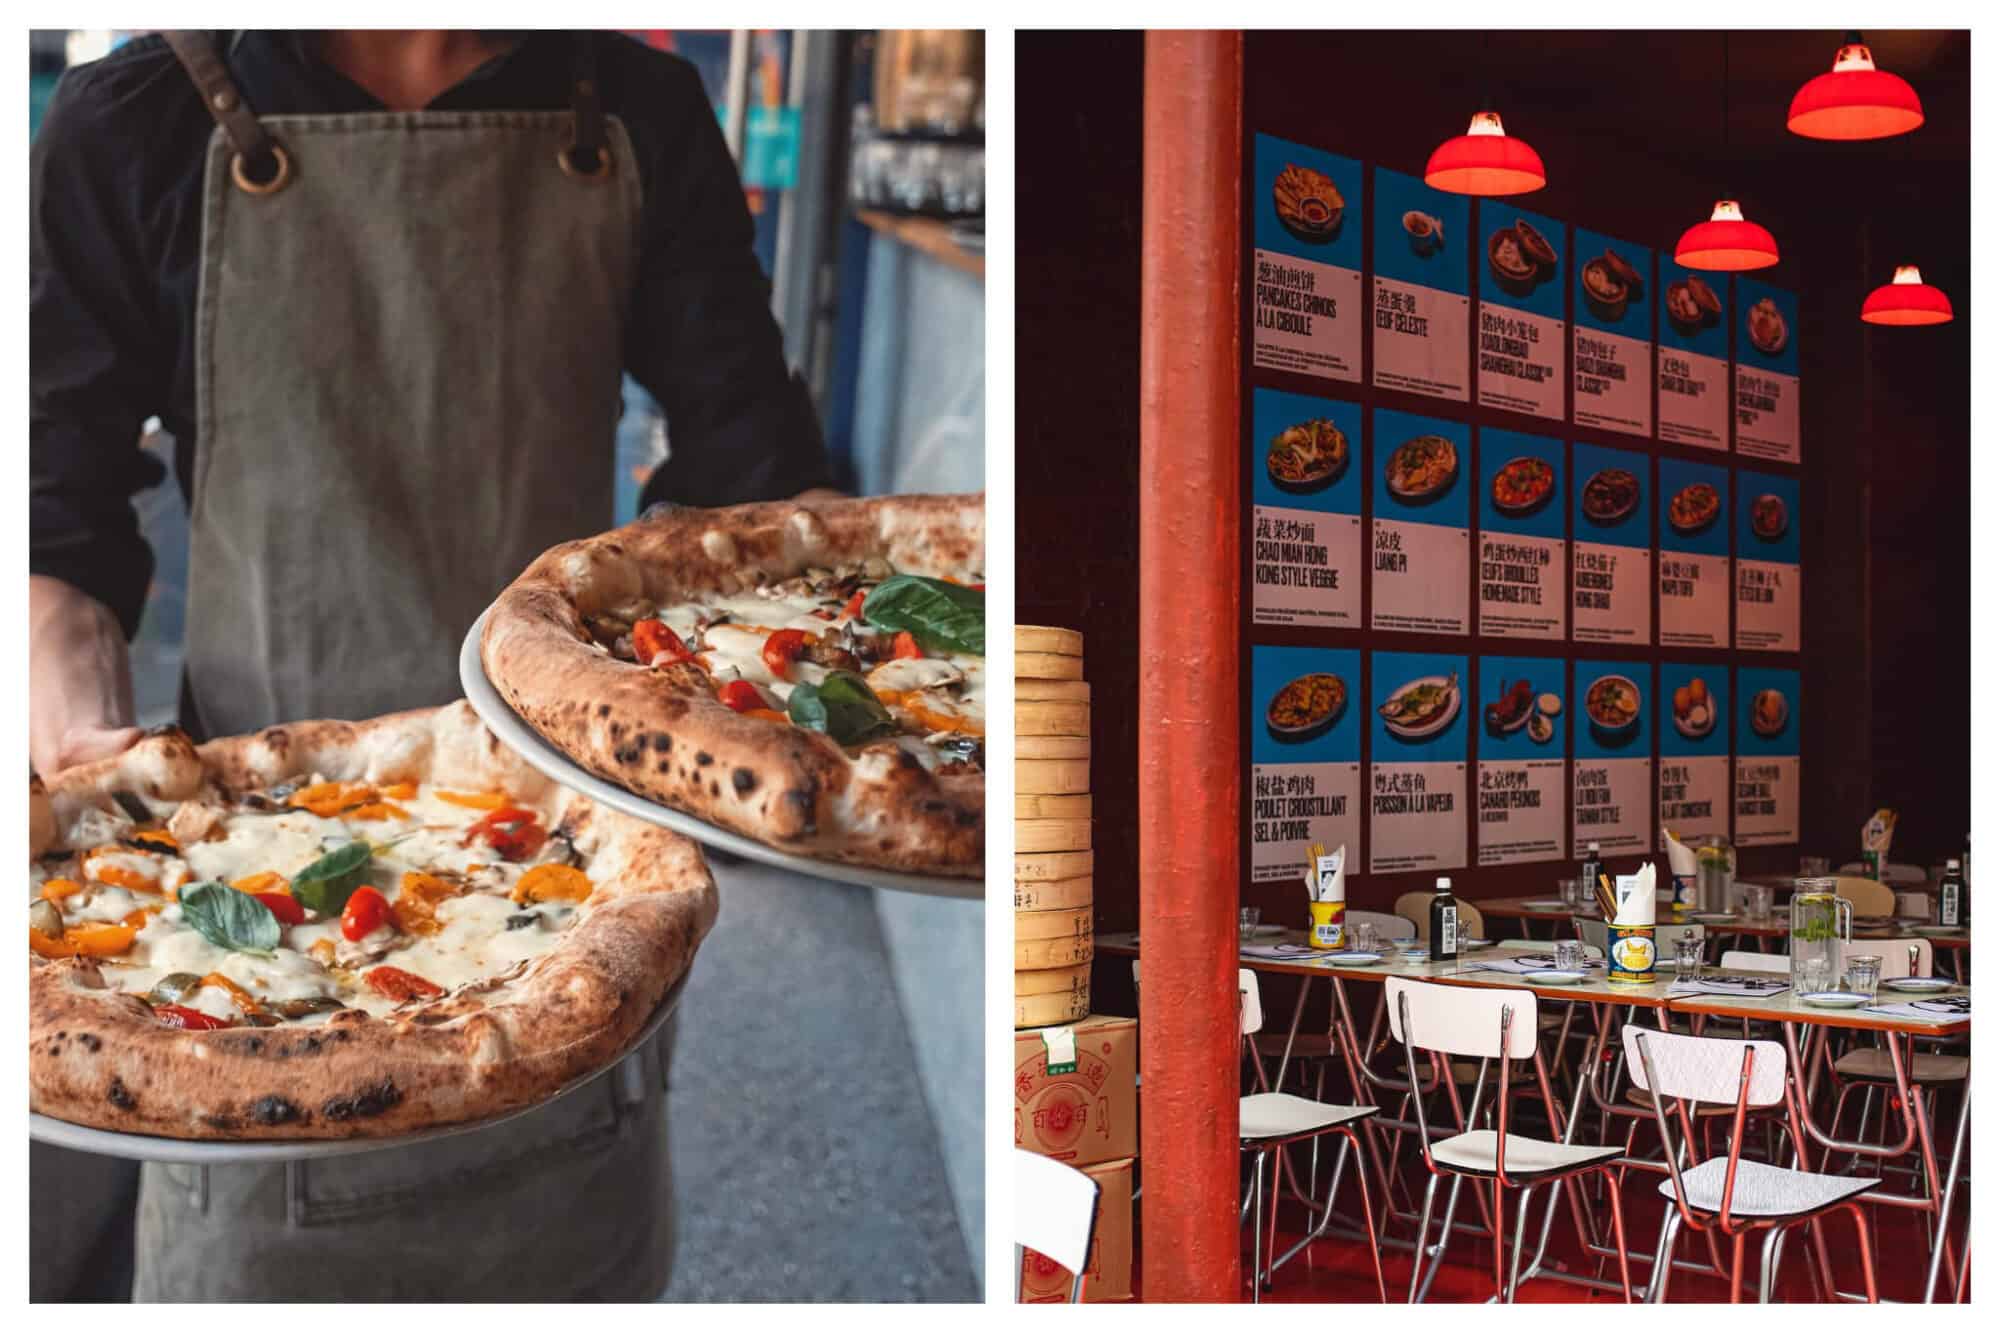 Left: A waiter carries two freshly cooked pizzas to a table at Iovine's restaurant, Right: The interior of Grand Bao, with posters on the wall and white chairs lining a long table.